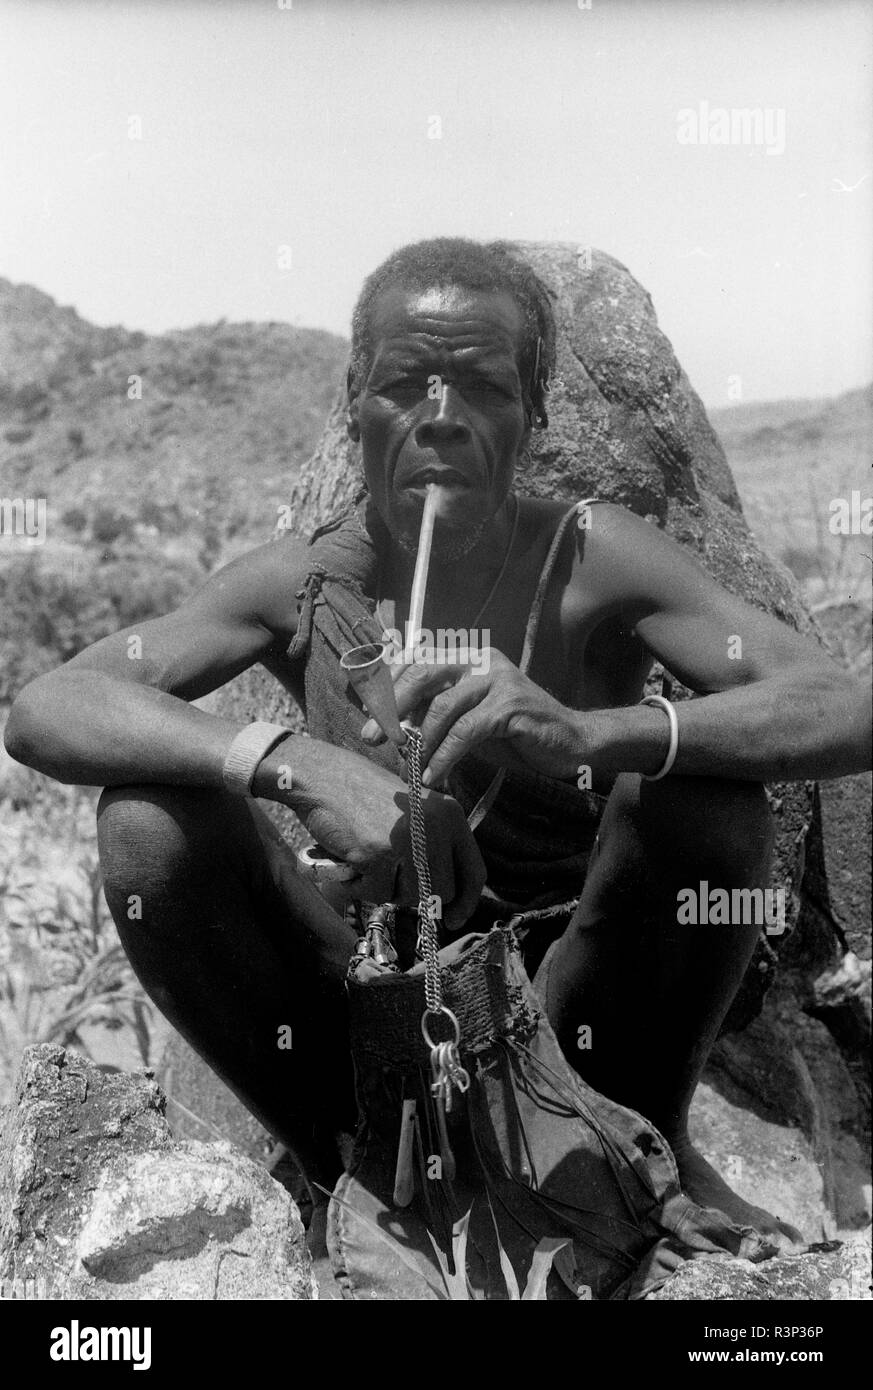 Cameroun 1950 tribesman pipe Banque D'Images